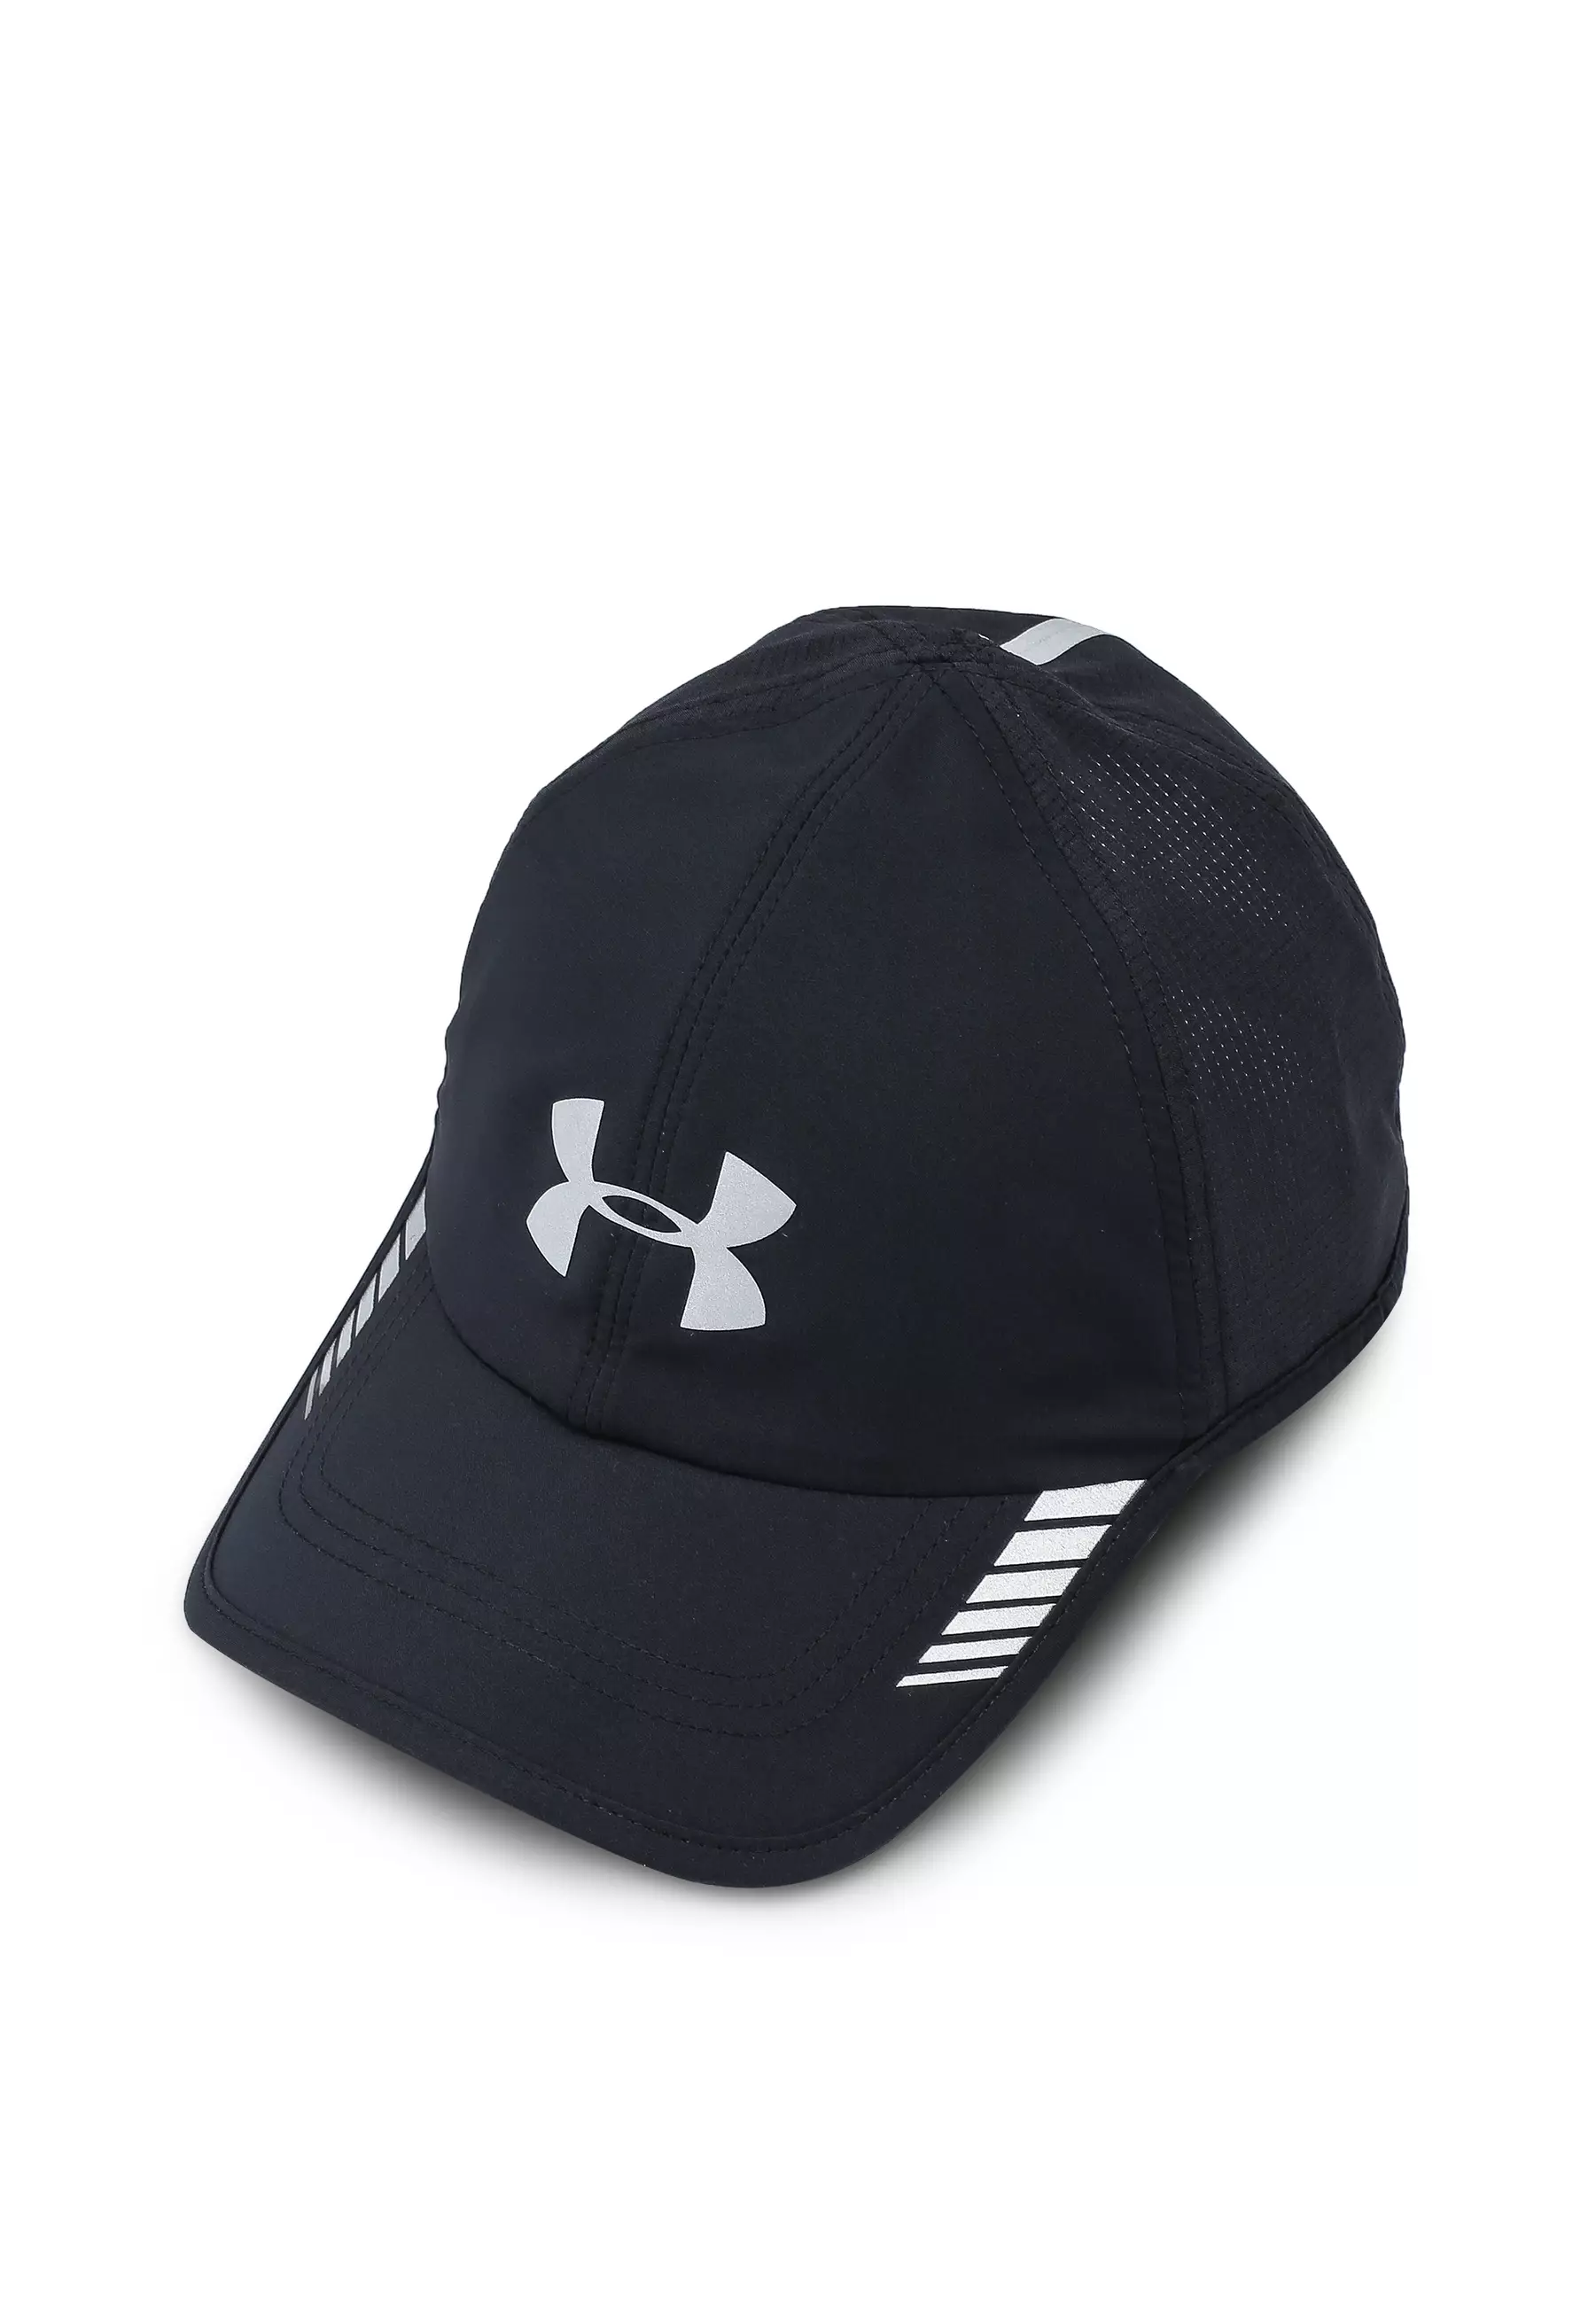 Under Armour Men's Iso-Chill Launch Camper Hat